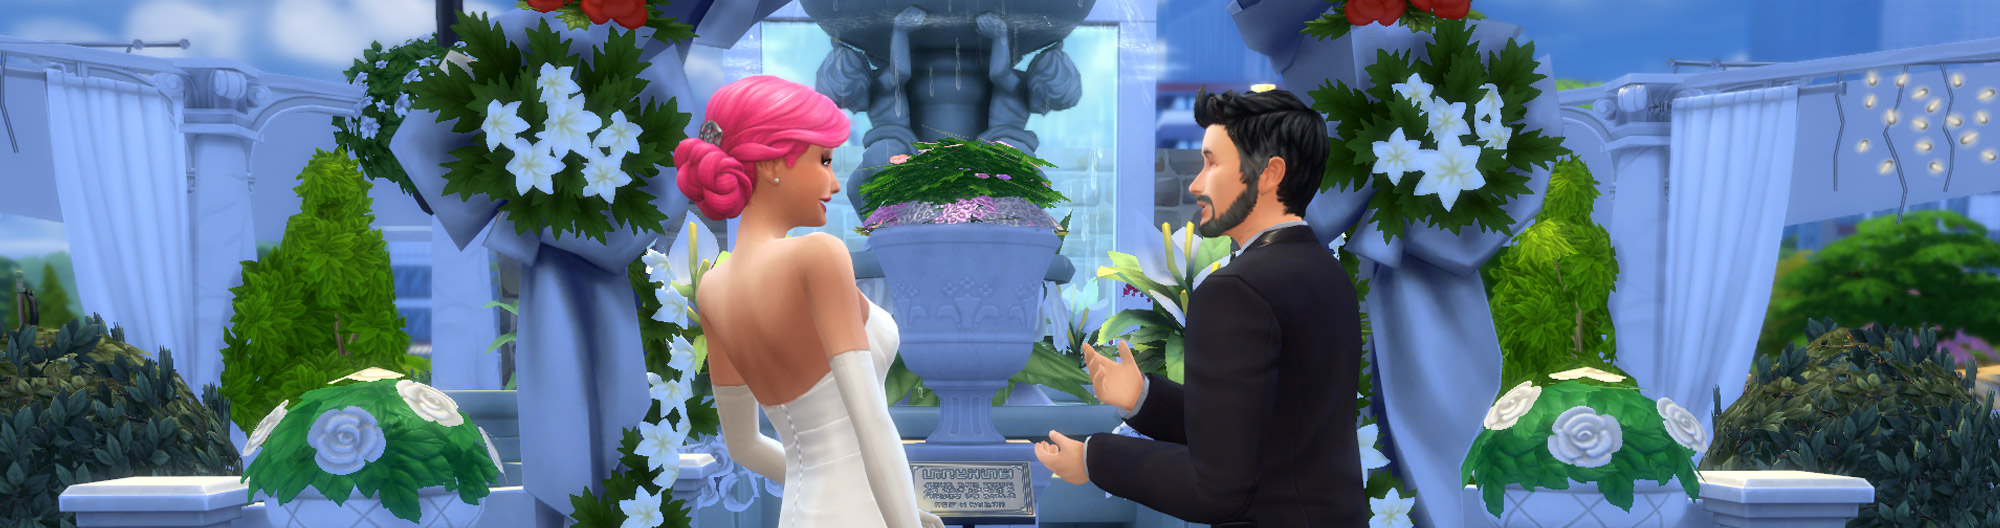 How to plan a Wedding in The Sims 4 - Sims Online